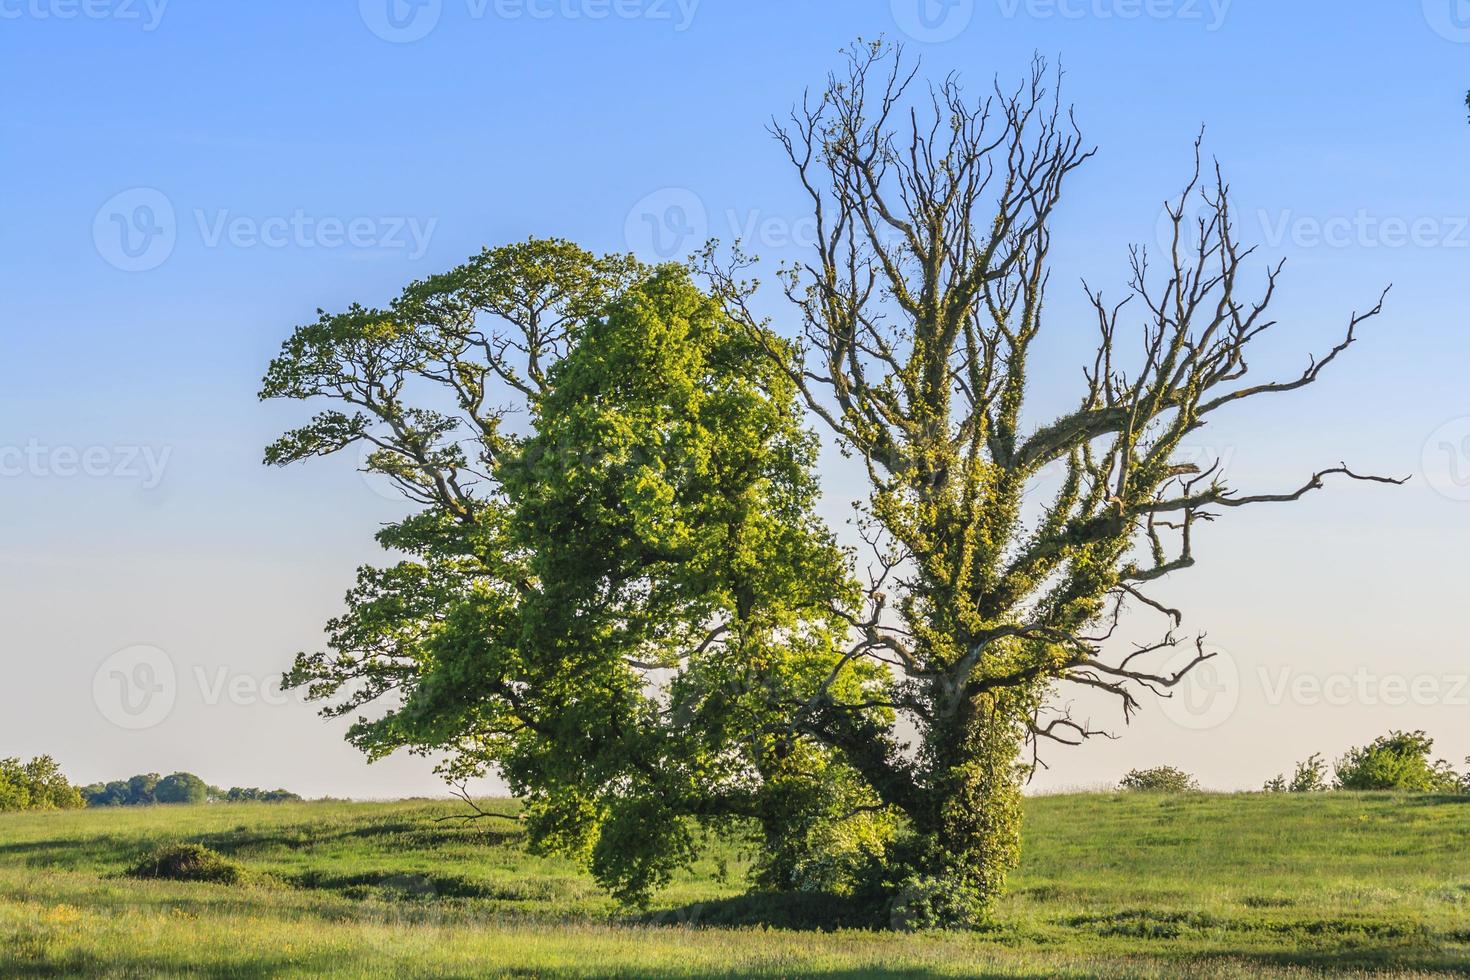 Picture of an old tree with blue skies in background photo